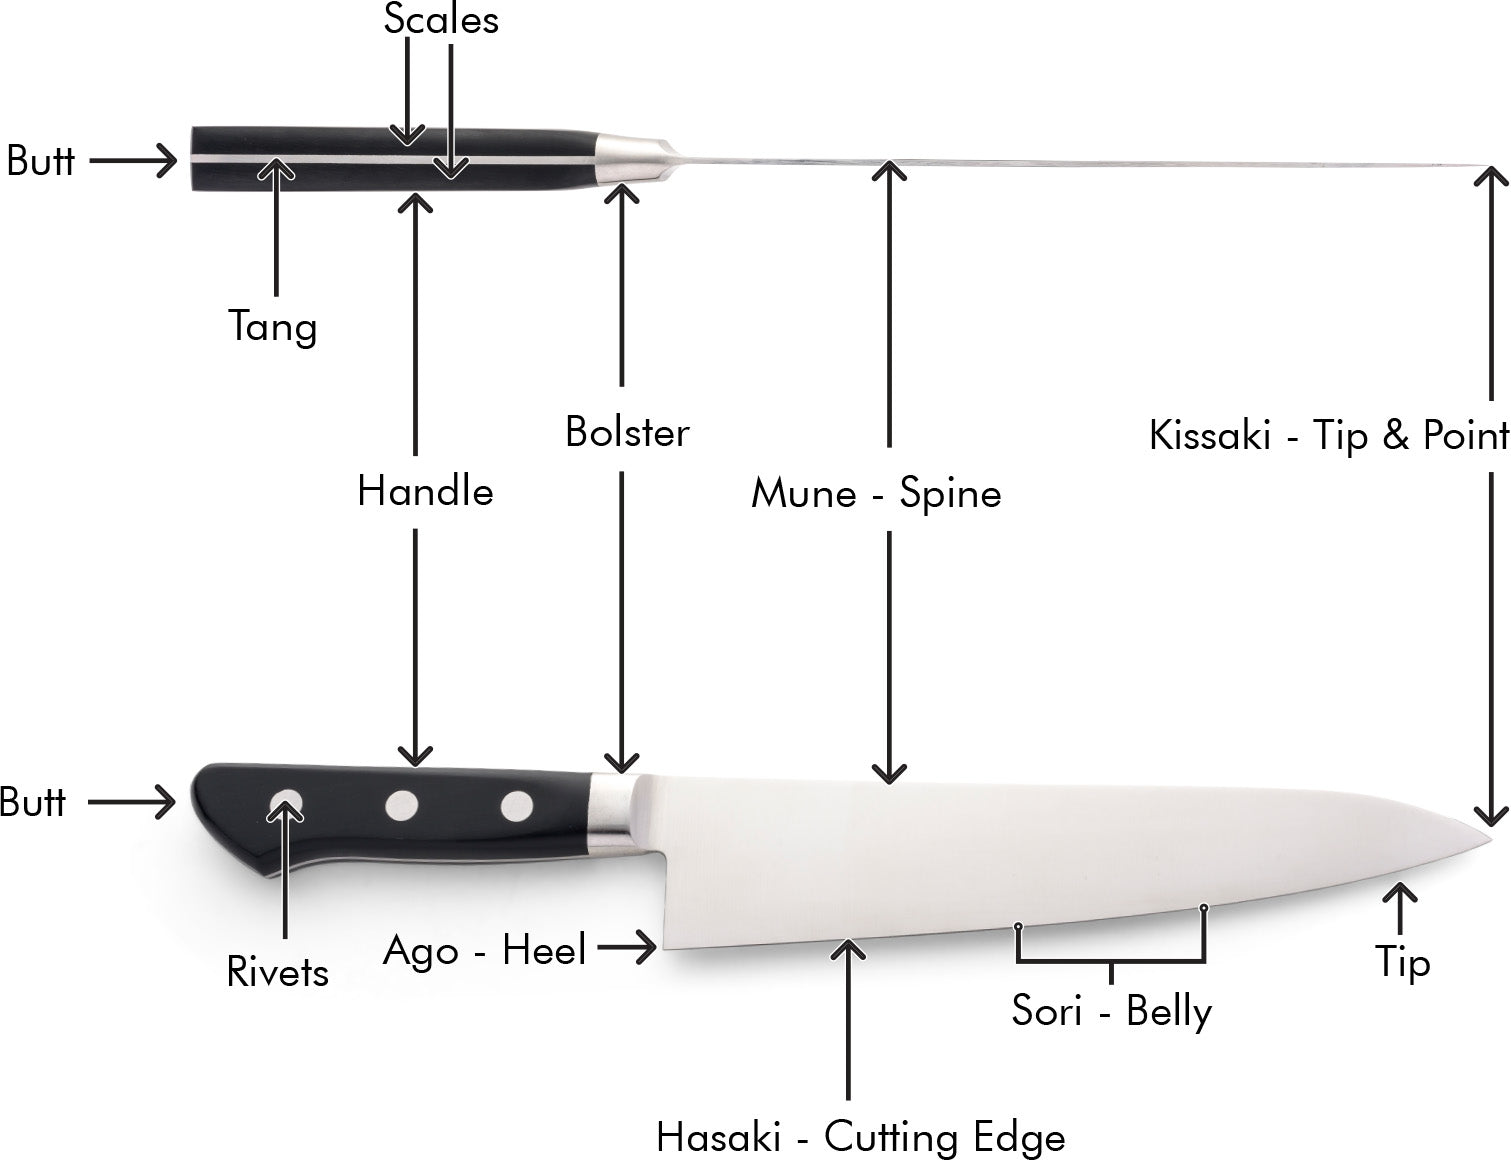 The Parts of a Kitchen Knife